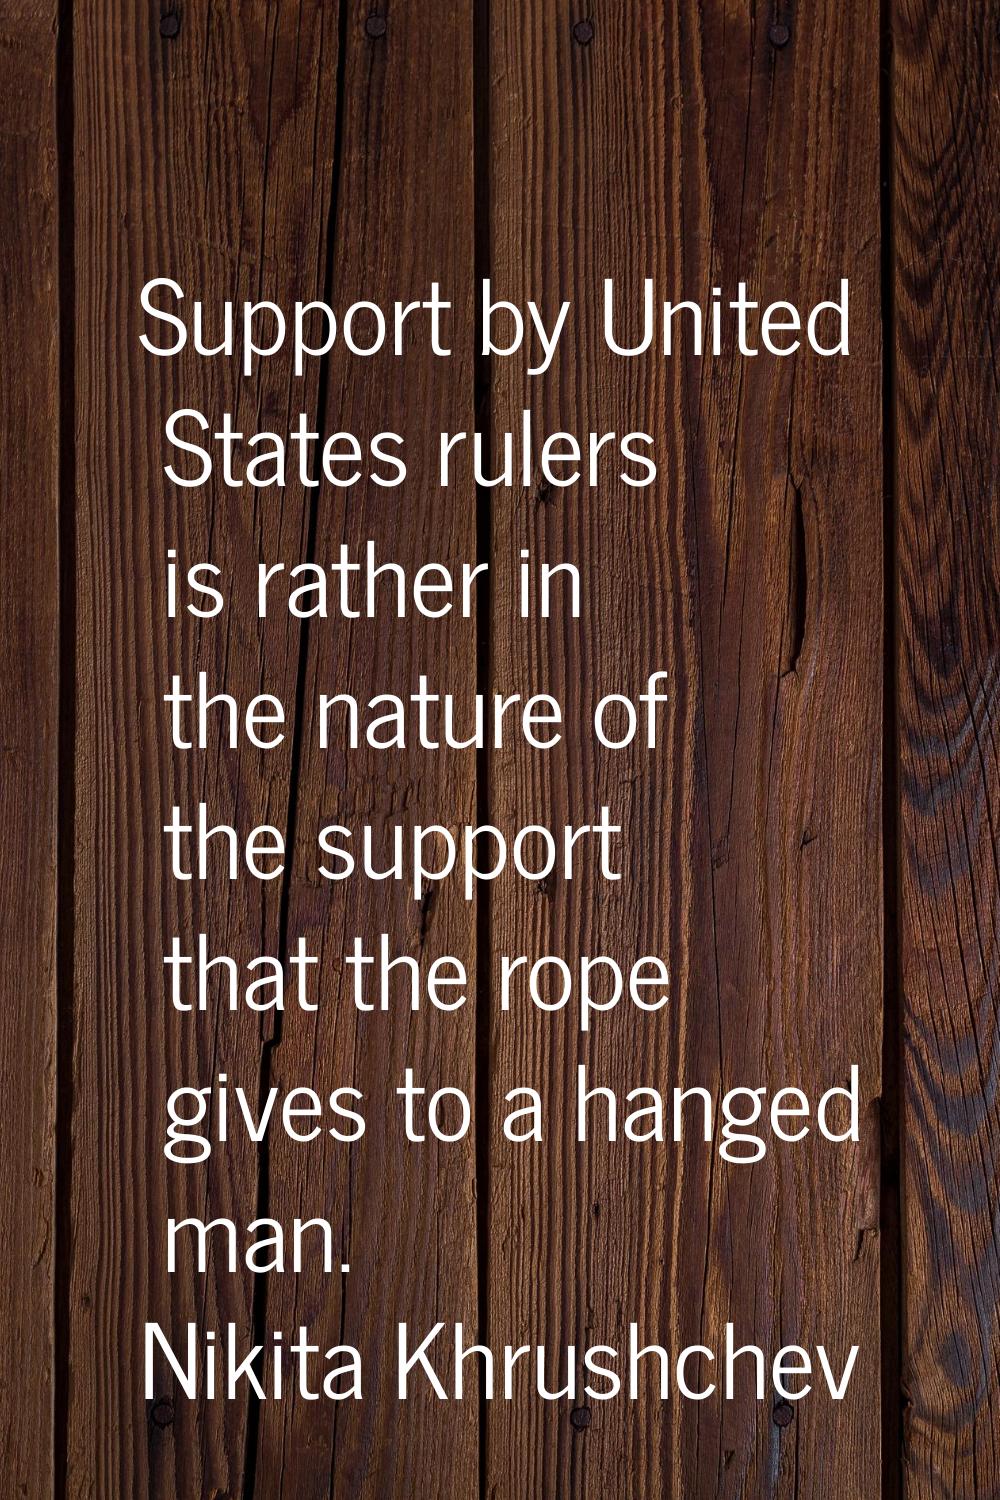 Support by United States rulers is rather in the nature of the support that the rope gives to a han